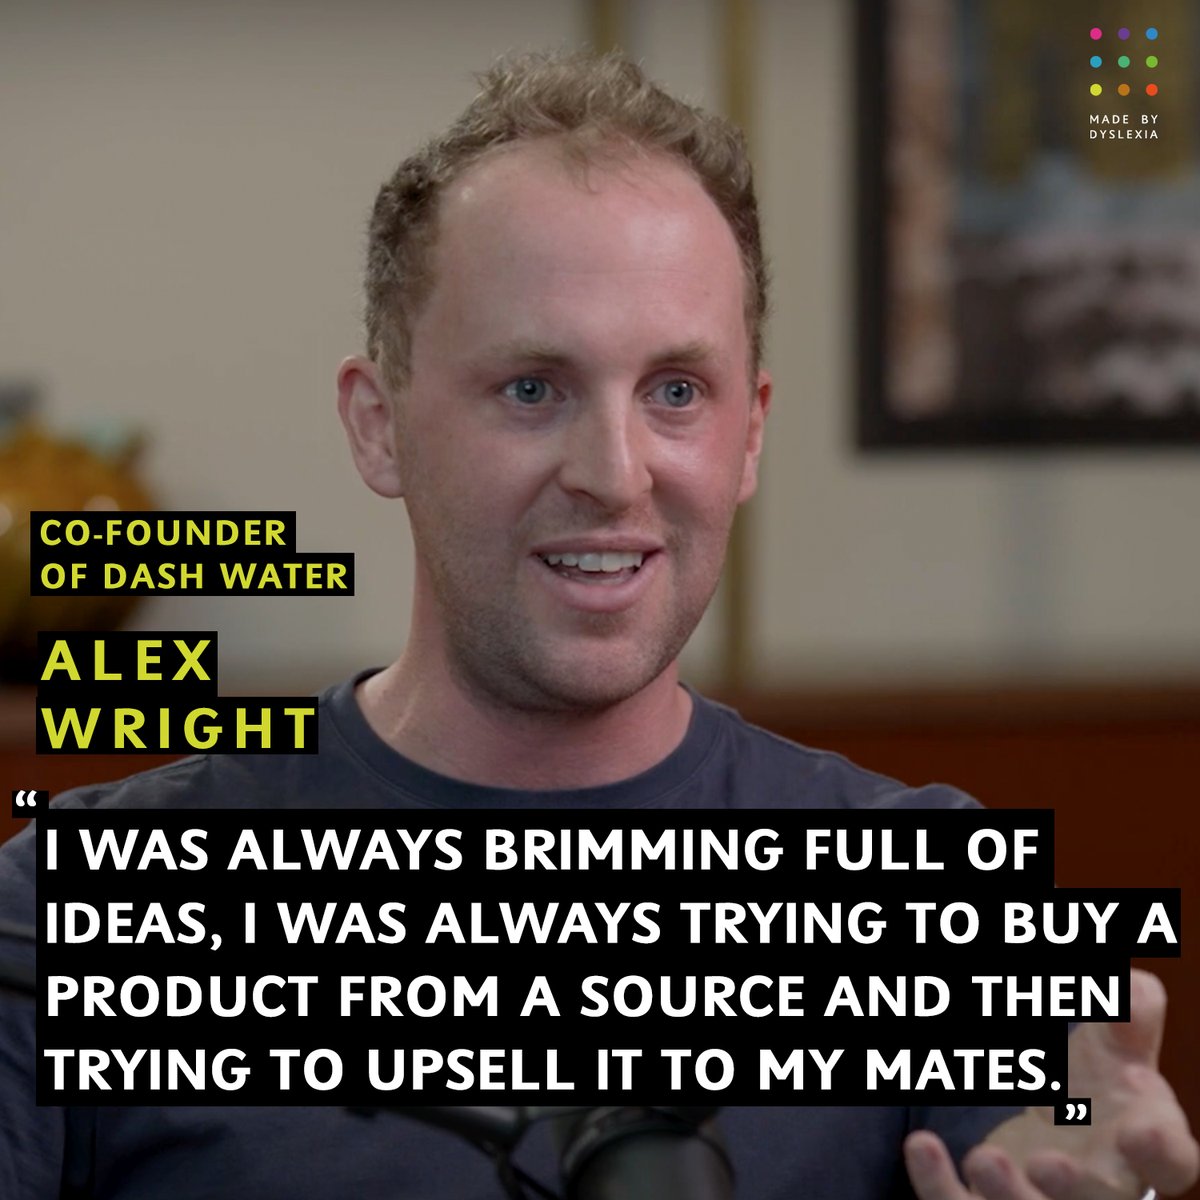 ❤️this #WednesdayWisdom from entrepreneur & co-founder of @DashDrinks, Alex Wright. 40% of self-made millionaires are dyslexic - brilliant at using #DyslexicThinking to spot gaps in the market, problem solve & give people what they want. watch #LIDT: bit.ly/45fuzar